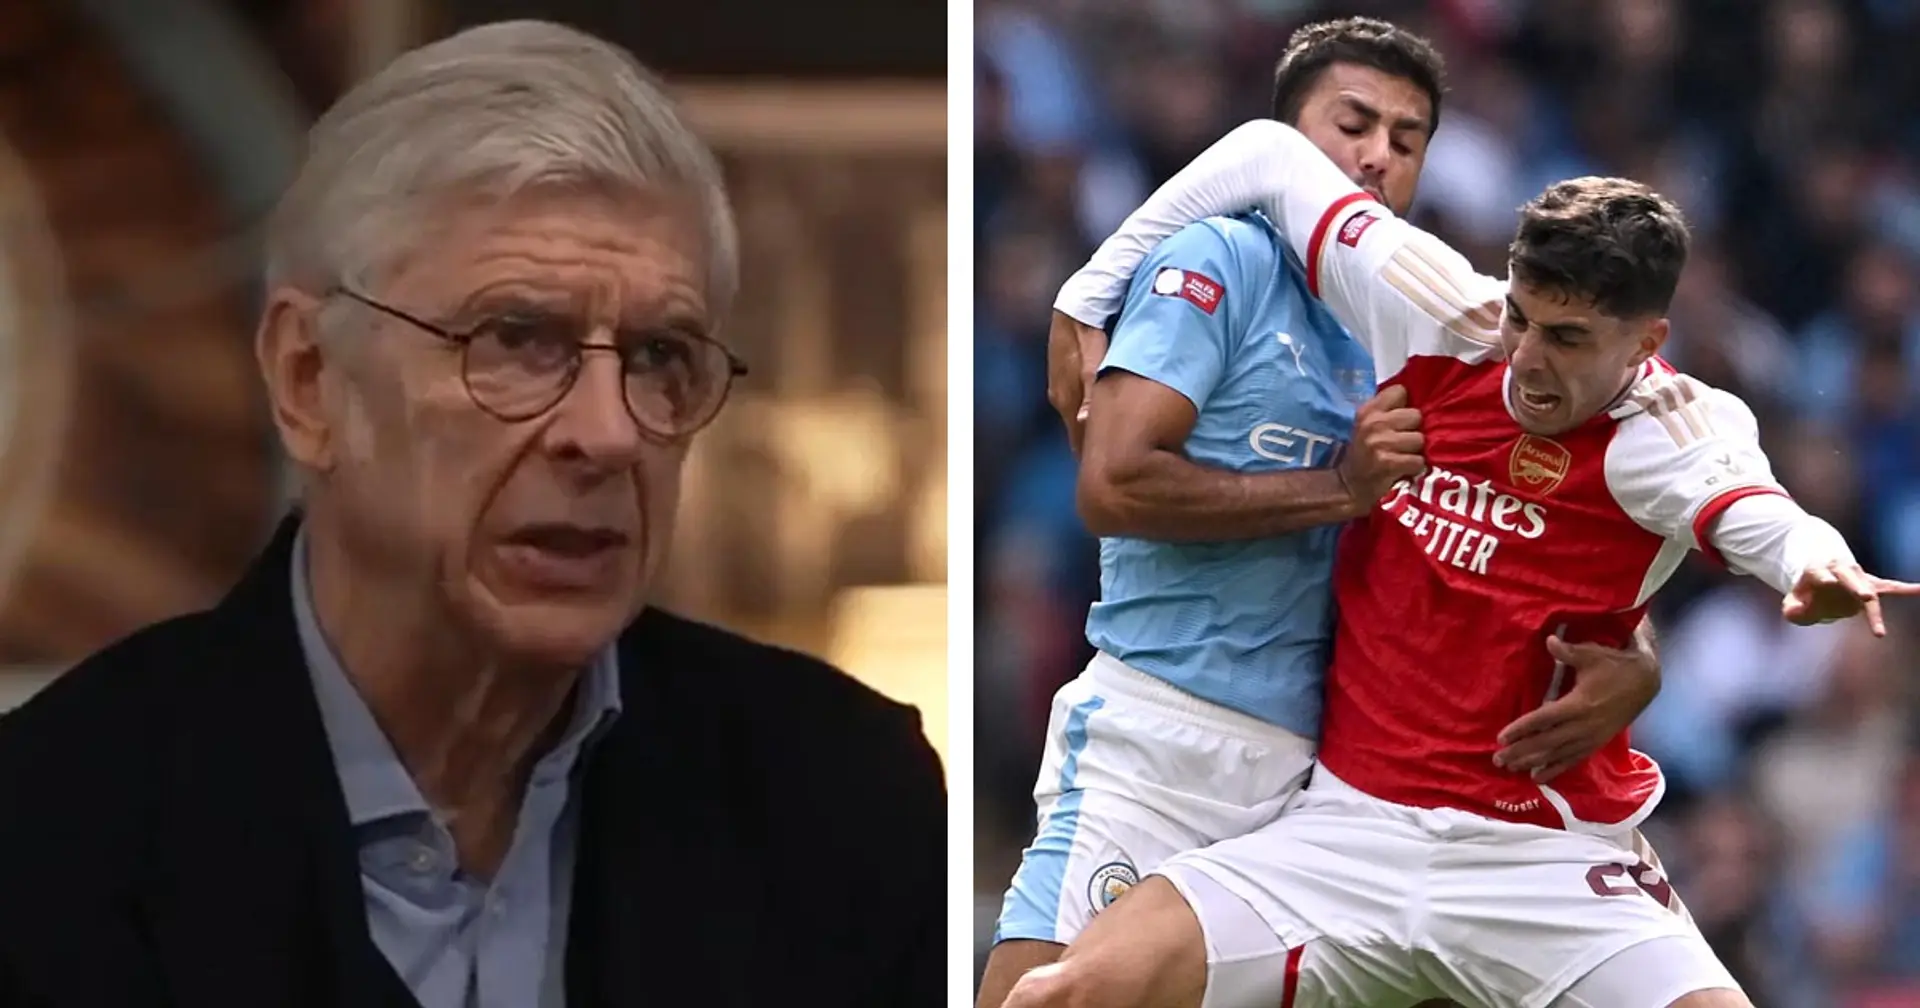 'They learned from last year': Wenger rates Arsenal's Premier League title-winning chances before Man City clash